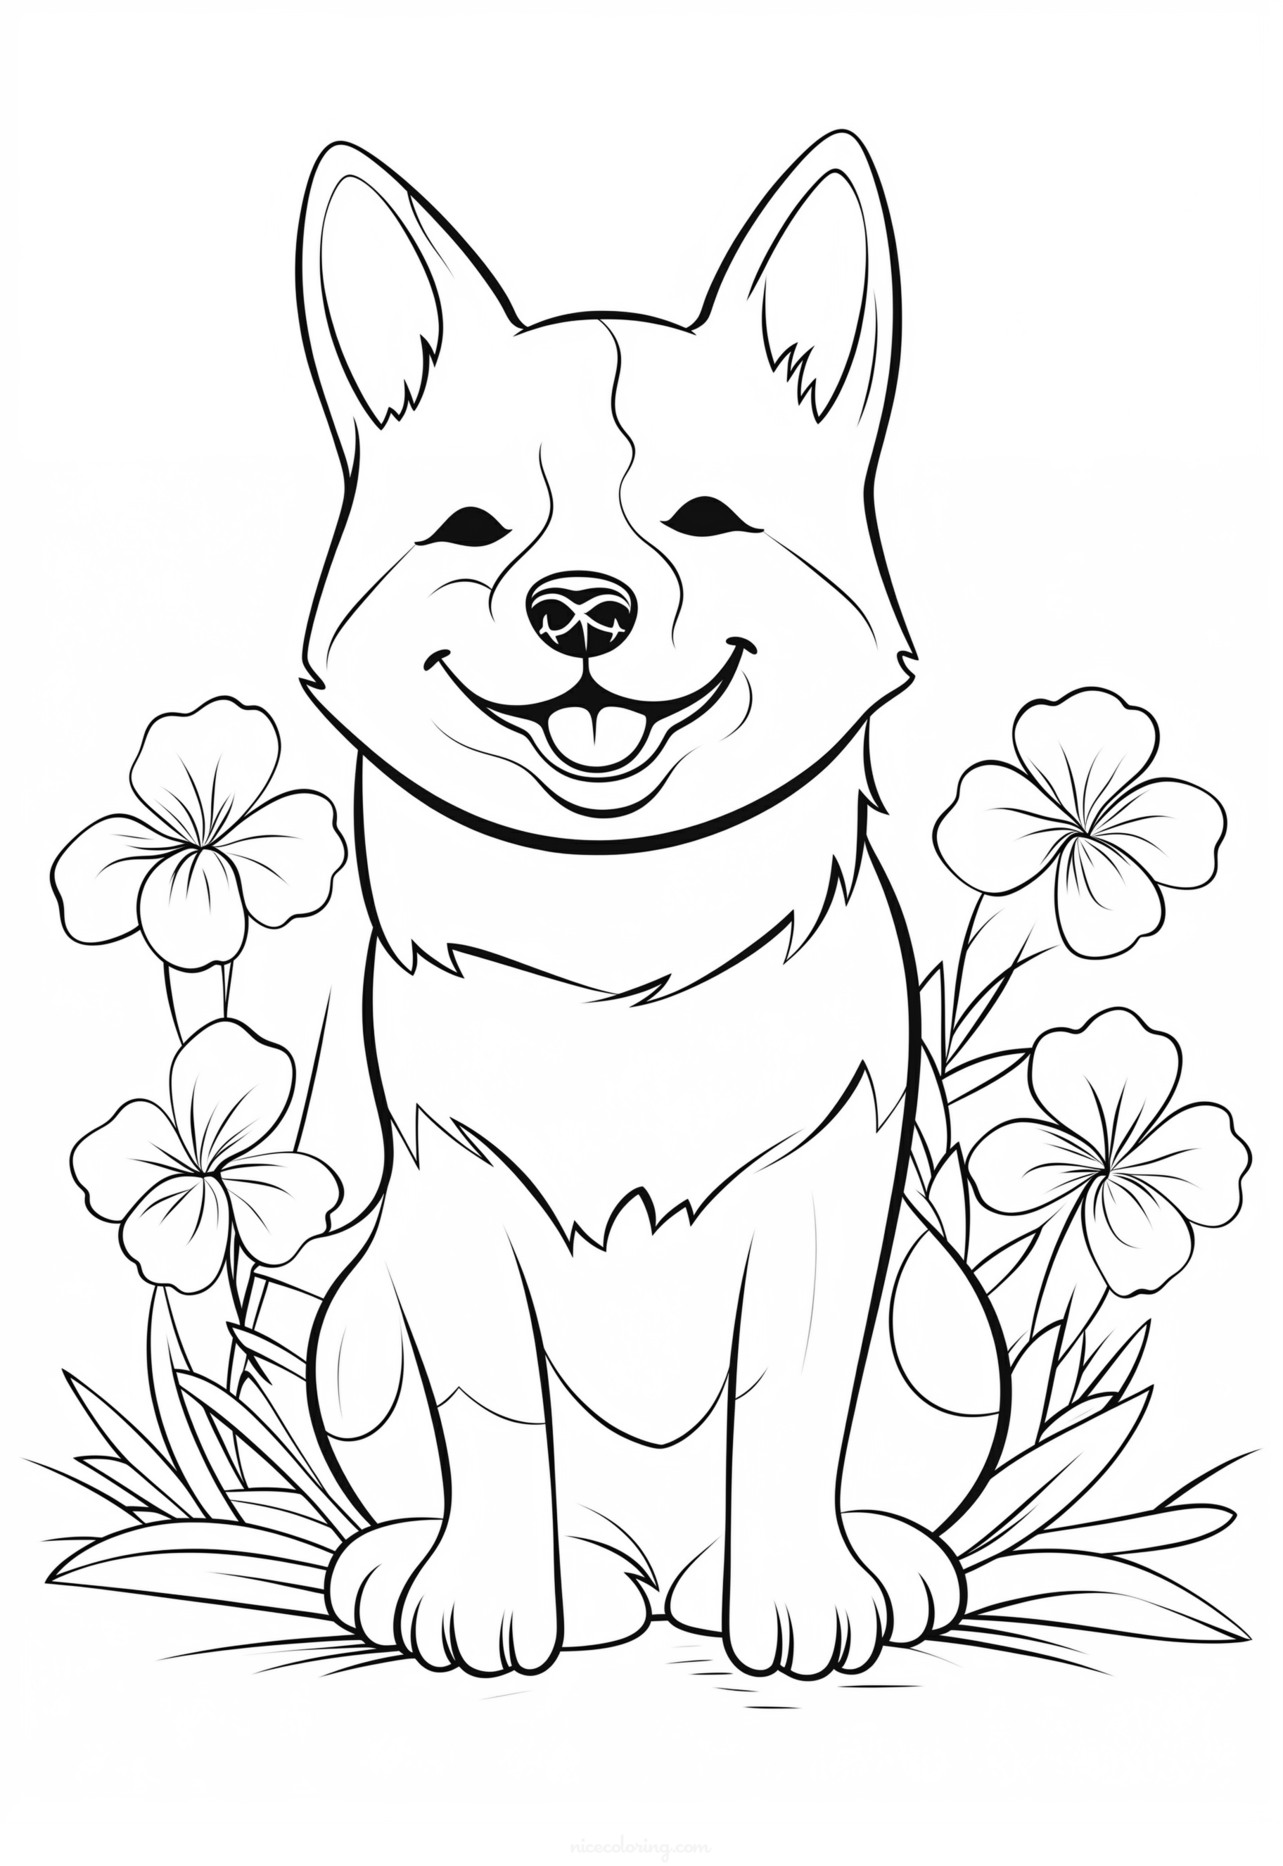 A happy dog playing with a ball coloring page